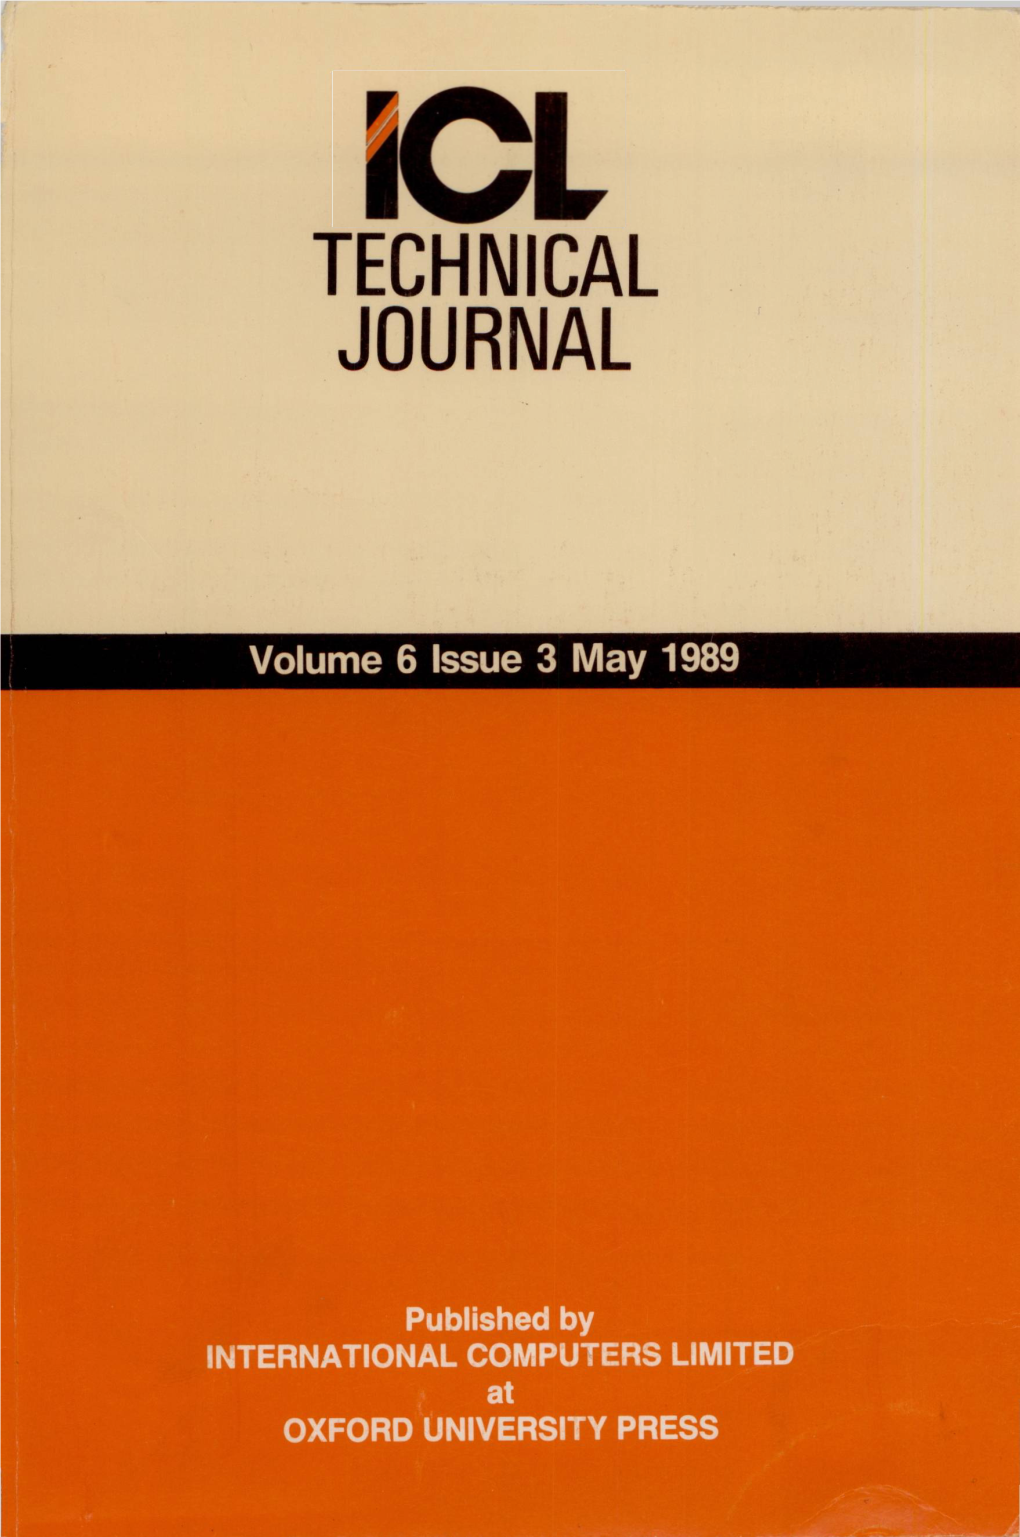 ICL Technical Journal Volume 6 Issue 3